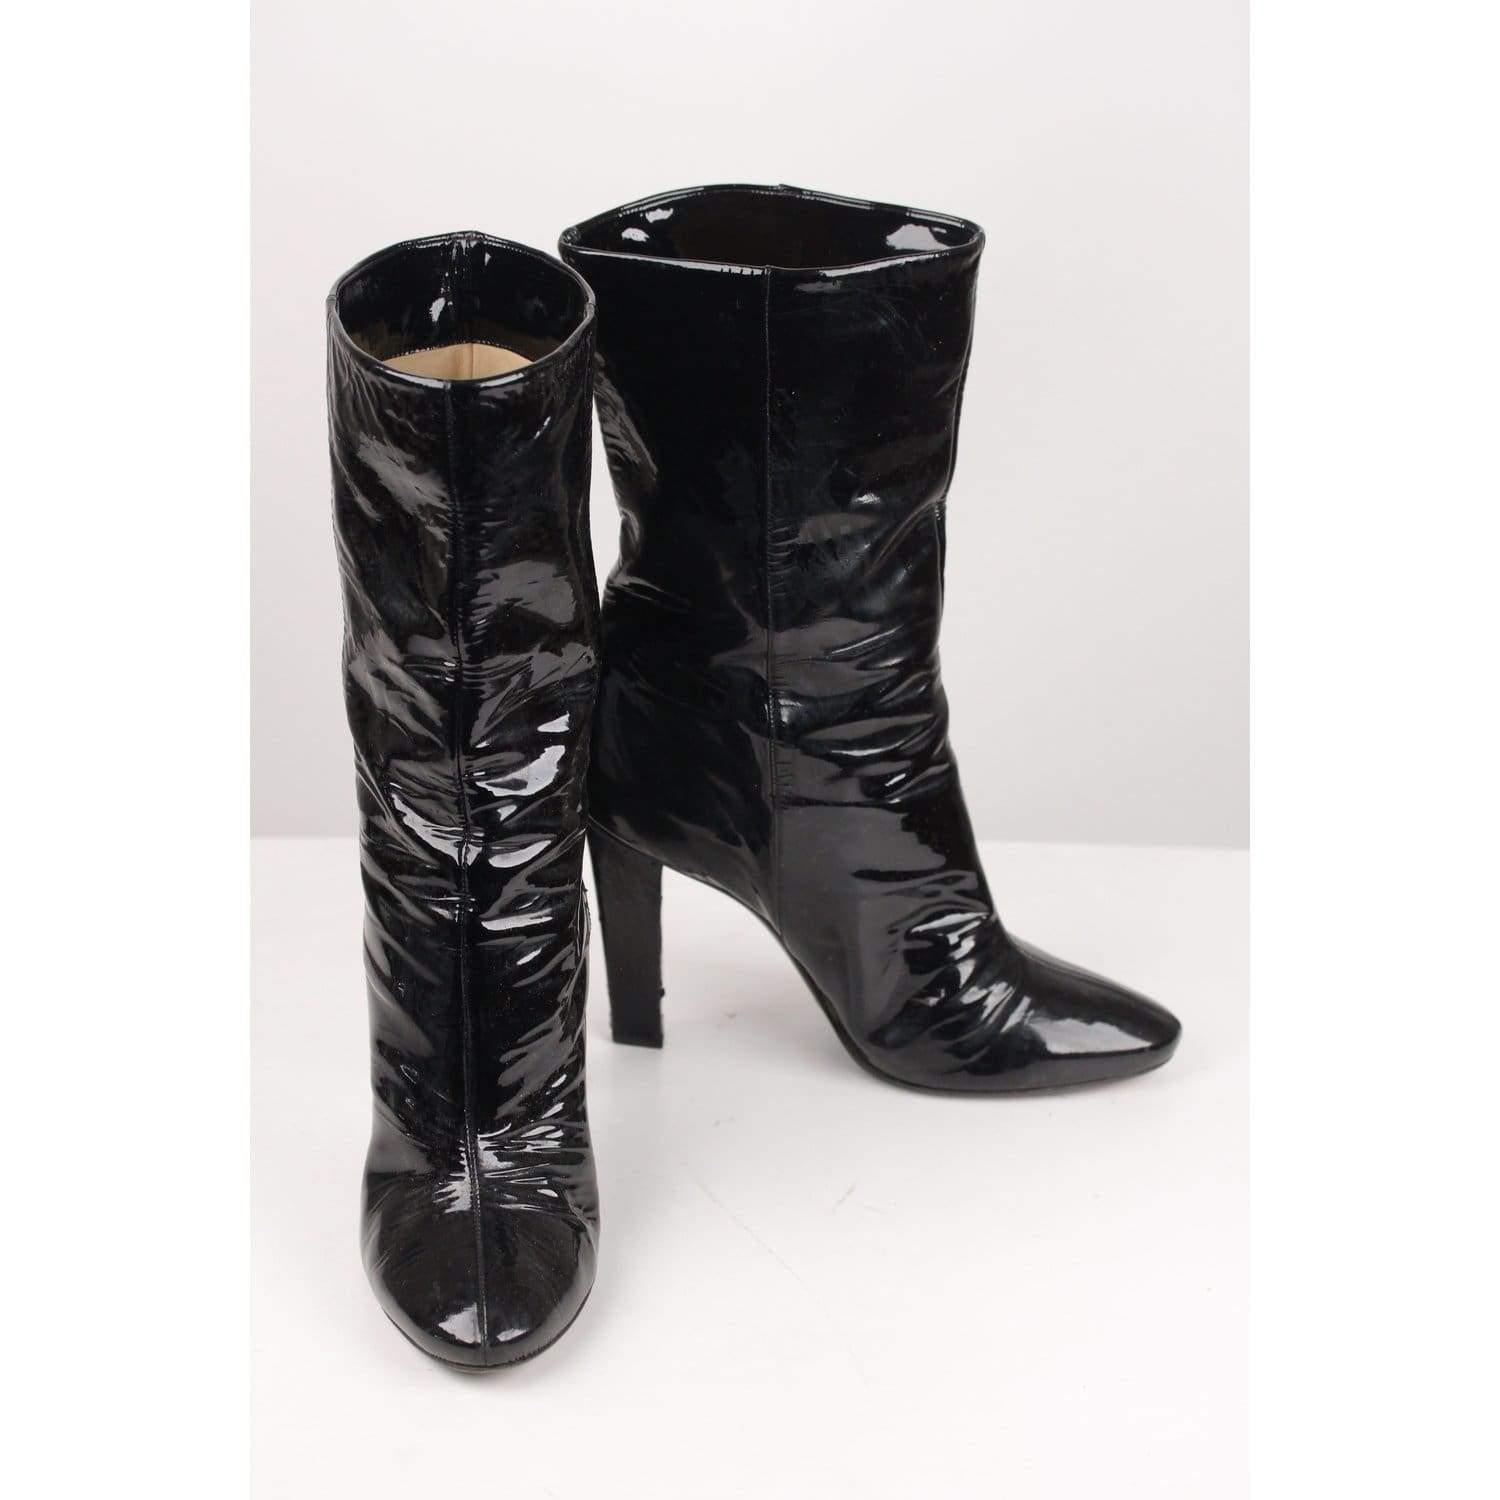 MATERIAL: Patent Leather COLOR: Black MODEL: Mid-Calf Boot GENDER: Women SIZE: 38.5 COUNTRY OF MANUFACTURE: Italy Condition CONDITION DETAILS: B :GOOD CONDITION - Some light wear of use - Some wear of use - Internal Ref: - 27568341-ER - Shipping